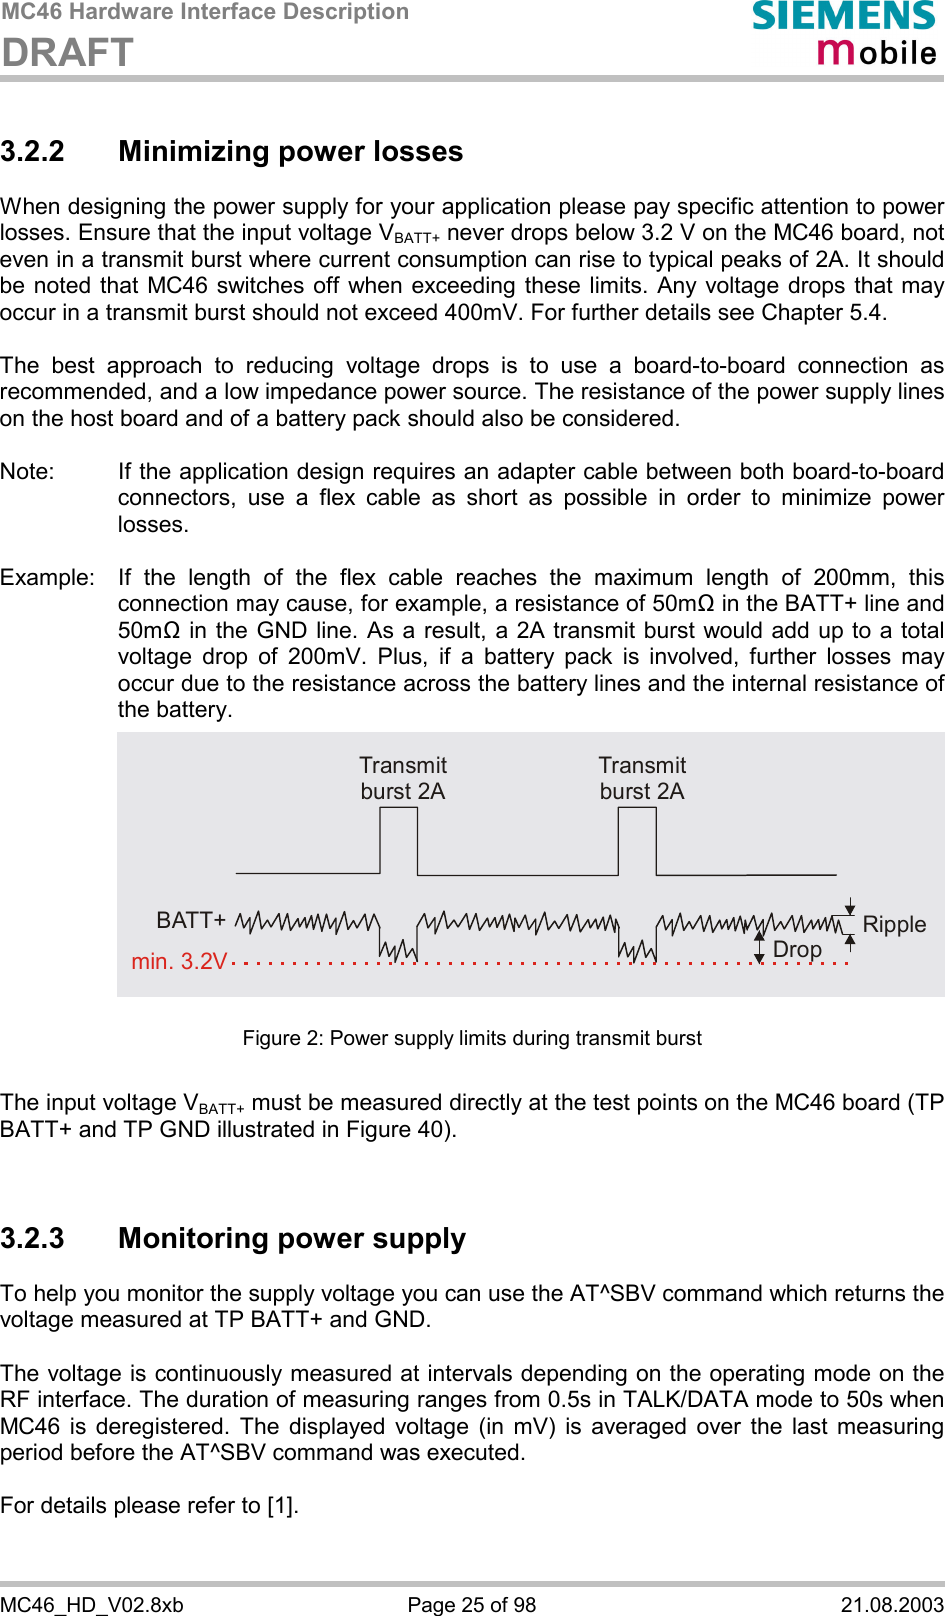 MC46 Hardware Interface Description DRAFT      MC46_HD_V02.8xb  Page 25 of 98  21.08.2003 3.2.2 Minimizing power losses When designing the power supply for your application please pay specific attention to power losses. Ensure that the input voltage VBATT+ never drops below 3.2 V on the MC46 board, not even in a transmit burst where current consumption can rise to typical peaks of 2A. It should be noted that MC46 switches off when exceeding these limits. Any voltage drops that may occur in a transmit burst should not exceed 400mV. For further details see Chapter 5.4.  The best approach to reducing voltage drops is to use a board-to-board connection as recommended, and a low impedance power source. The resistance of the power supply lines on the host board and of a battery pack should also be considered.  Note:  If the application design requires an adapter cable between both board-to-board connectors, use a flex cable as short as possible in order to minimize power losses.   Example:  If the length of the flex cable reaches the maximum length of 200mm, this connection may cause, for example, a resistance of 50m! in the BATT+ line and 50m! in the GND line. As a result, a 2A transmit burst would add up to a total voltage drop of 200mV. Plus, if a battery pack is involved, further losses may occur due to the resistance across the battery lines and the internal resistance of the battery.             Figure 2: Power supply limits during transmit burst  The input voltage VBATT+ must be measured directly at the test points on the MC46 board (TP BATT+ and TP GND illustrated in Figure 40).   3.2.3  Monitoring power supply To help you monitor the supply voltage you can use the AT^SBV command which returns the voltage measured at TP BATT+ and GND.   The voltage is continuously measured at intervals depending on the operating mode on the RF interface. The duration of measuring ranges from 0.5s in TALK/DATA mode to 50s when MC46 is deregistered. The displayed voltage (in mV) is averaged over the last measuring period before the AT^SBV command was executed.   For details please refer to [1].   Transmit burst 2ATransmit burst 2ARippleDropmin. 3.2VBATT+